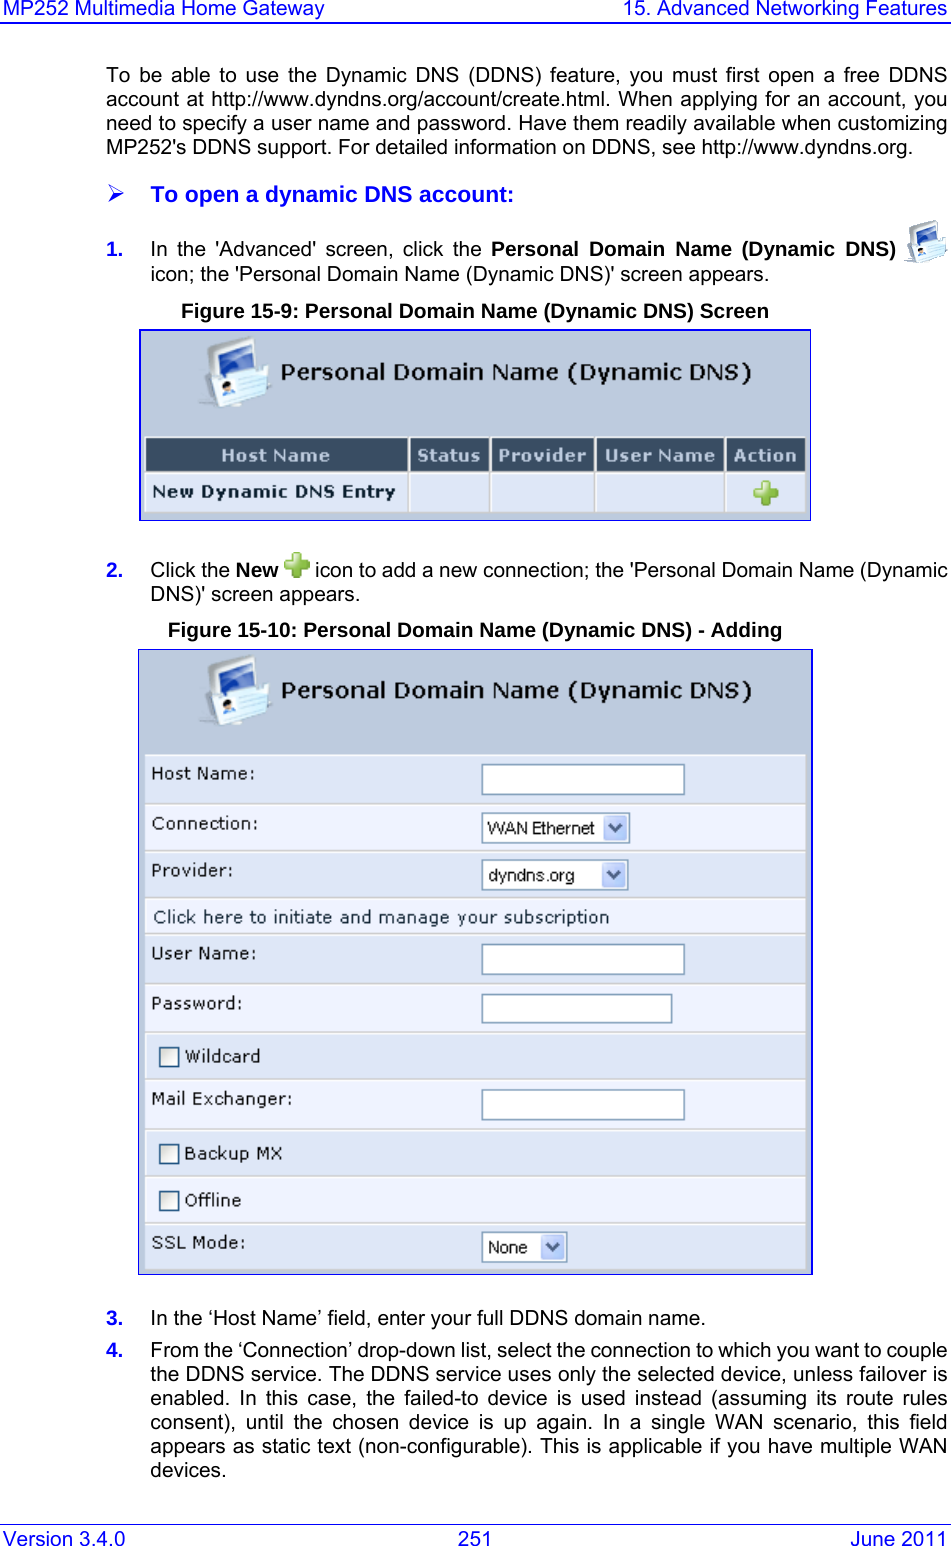 MP252 Multimedia Home Gateway  15. Advanced Networking Features Version 3.4.0  251  June 2011 To be able to use the Dynamic DNS (DDNS) feature, you must first open a free DDNS account at http://www.dyndns.org/account/create.html. When applying for an account, you need to specify a user name and password. Have them readily available when customizing MP252&apos;s DDNS support. For detailed information on DDNS, see http://www.dyndns.org. ¾ To open a dynamic DNS account: 1.  In the &apos;Advanced&apos; screen, click the Personal Domain Name (Dynamic DNS)   icon; the &apos;Personal Domain Name (Dynamic DNS)&apos; screen appears. Figure 15-9: Personal Domain Name (Dynamic DNS) Screen  2.  Click the New   icon to add a new connection; the &apos;Personal Domain Name (Dynamic DNS)&apos; screen appears. Figure 15-10: Personal Domain Name (Dynamic DNS) - Adding  3.  In the ‘Host Name’ field, enter your full DDNS domain name. 4.  From the ‘Connection’ drop-down list, select the connection to which you want to couple the DDNS service. The DDNS service uses only the selected device, unless failover is enabled. In this case, the failed-to device is used instead (assuming its route rules consent), until the chosen device is up again. In a single WAN scenario, this field appears as static text (non-configurable). This is applicable if you have multiple WAN devices.  